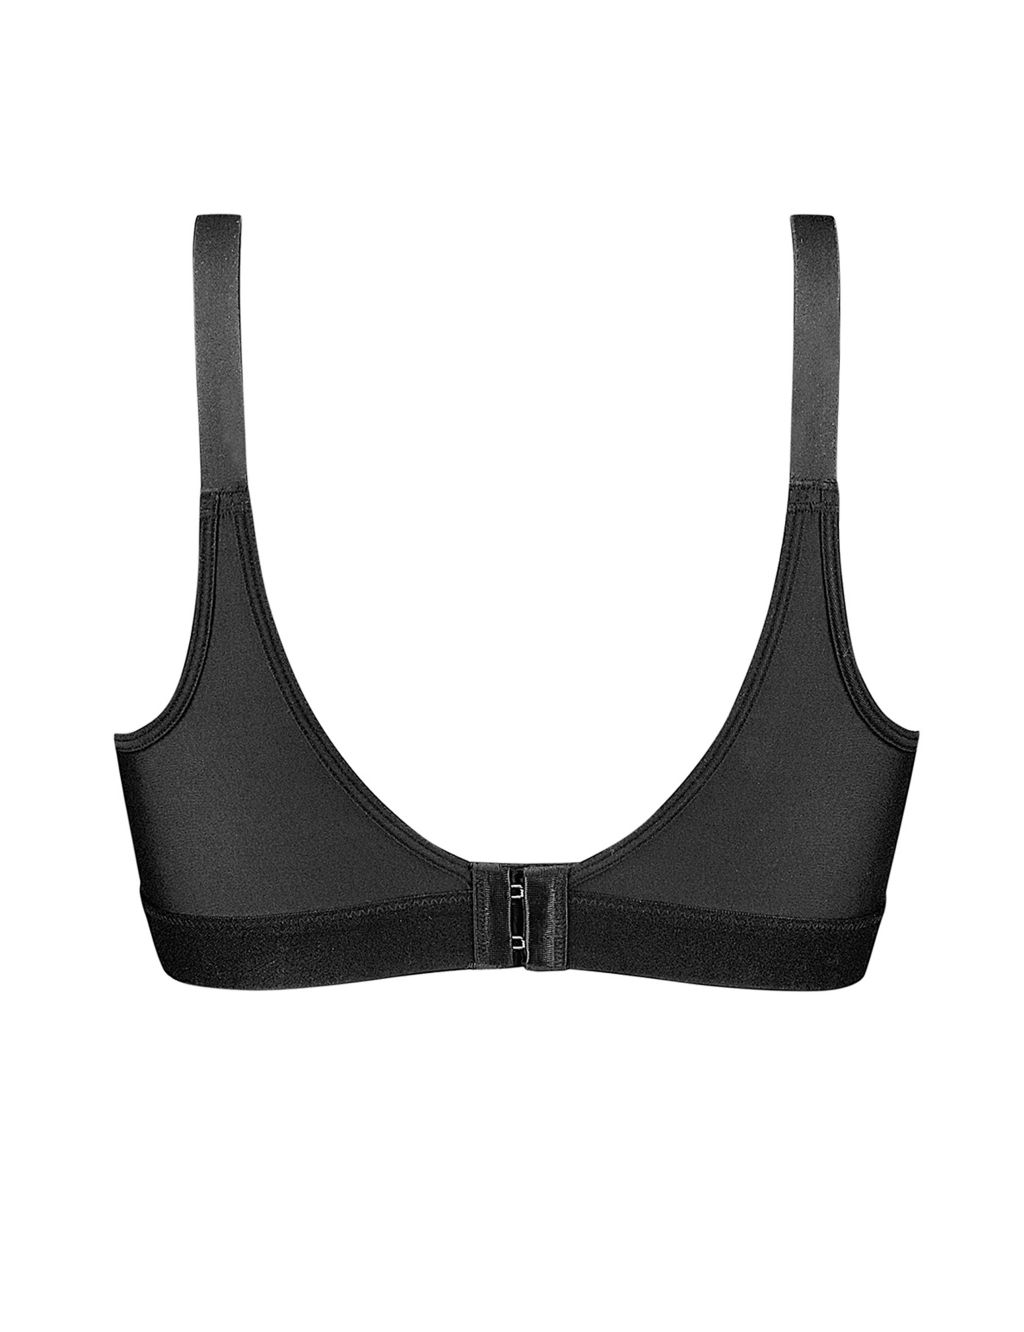 Triaction Wellness Non Wired Sports Bra image 5